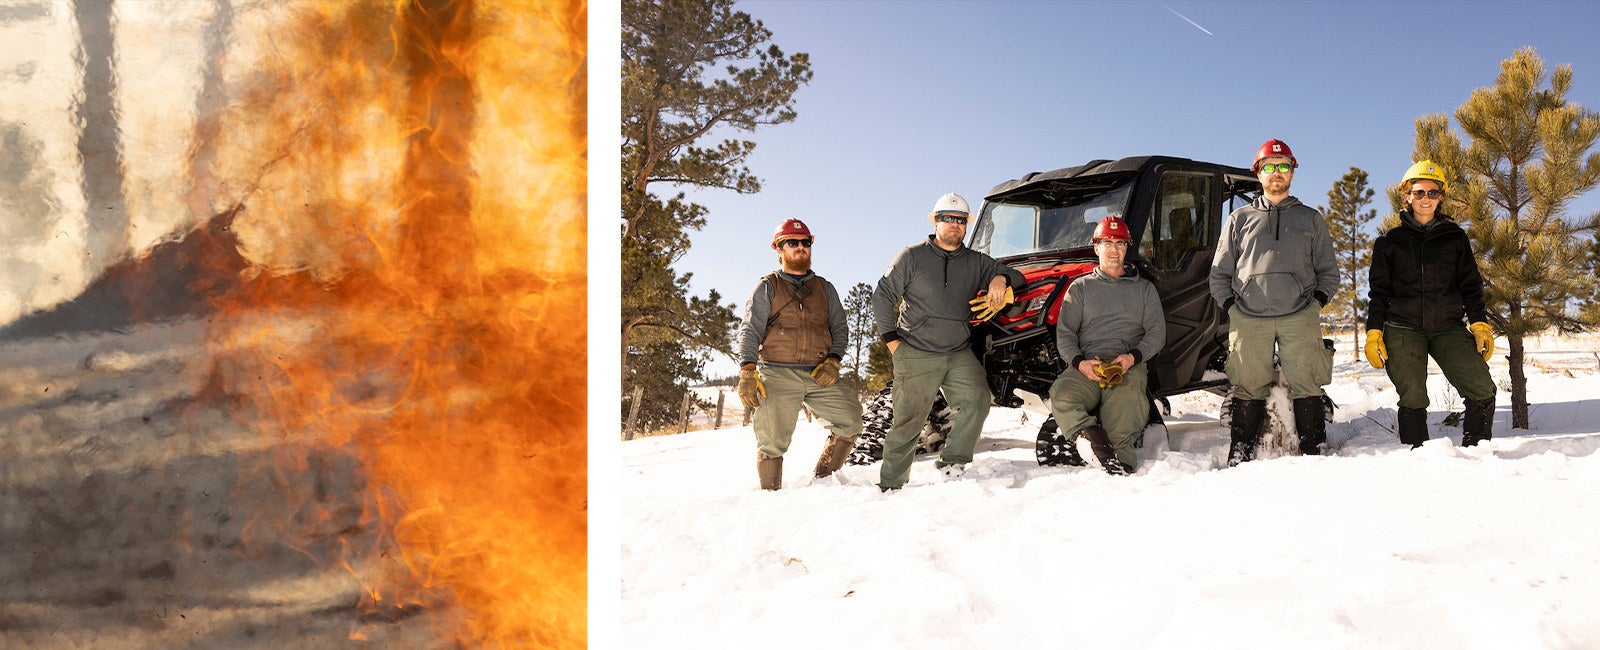 two side-by-side photos show a close-up photo of flame with heat obscuring the snow and trees in the background, and five forest service workers line up in sweatshirts, hearthats, and sunglasses in front of a four wheeler